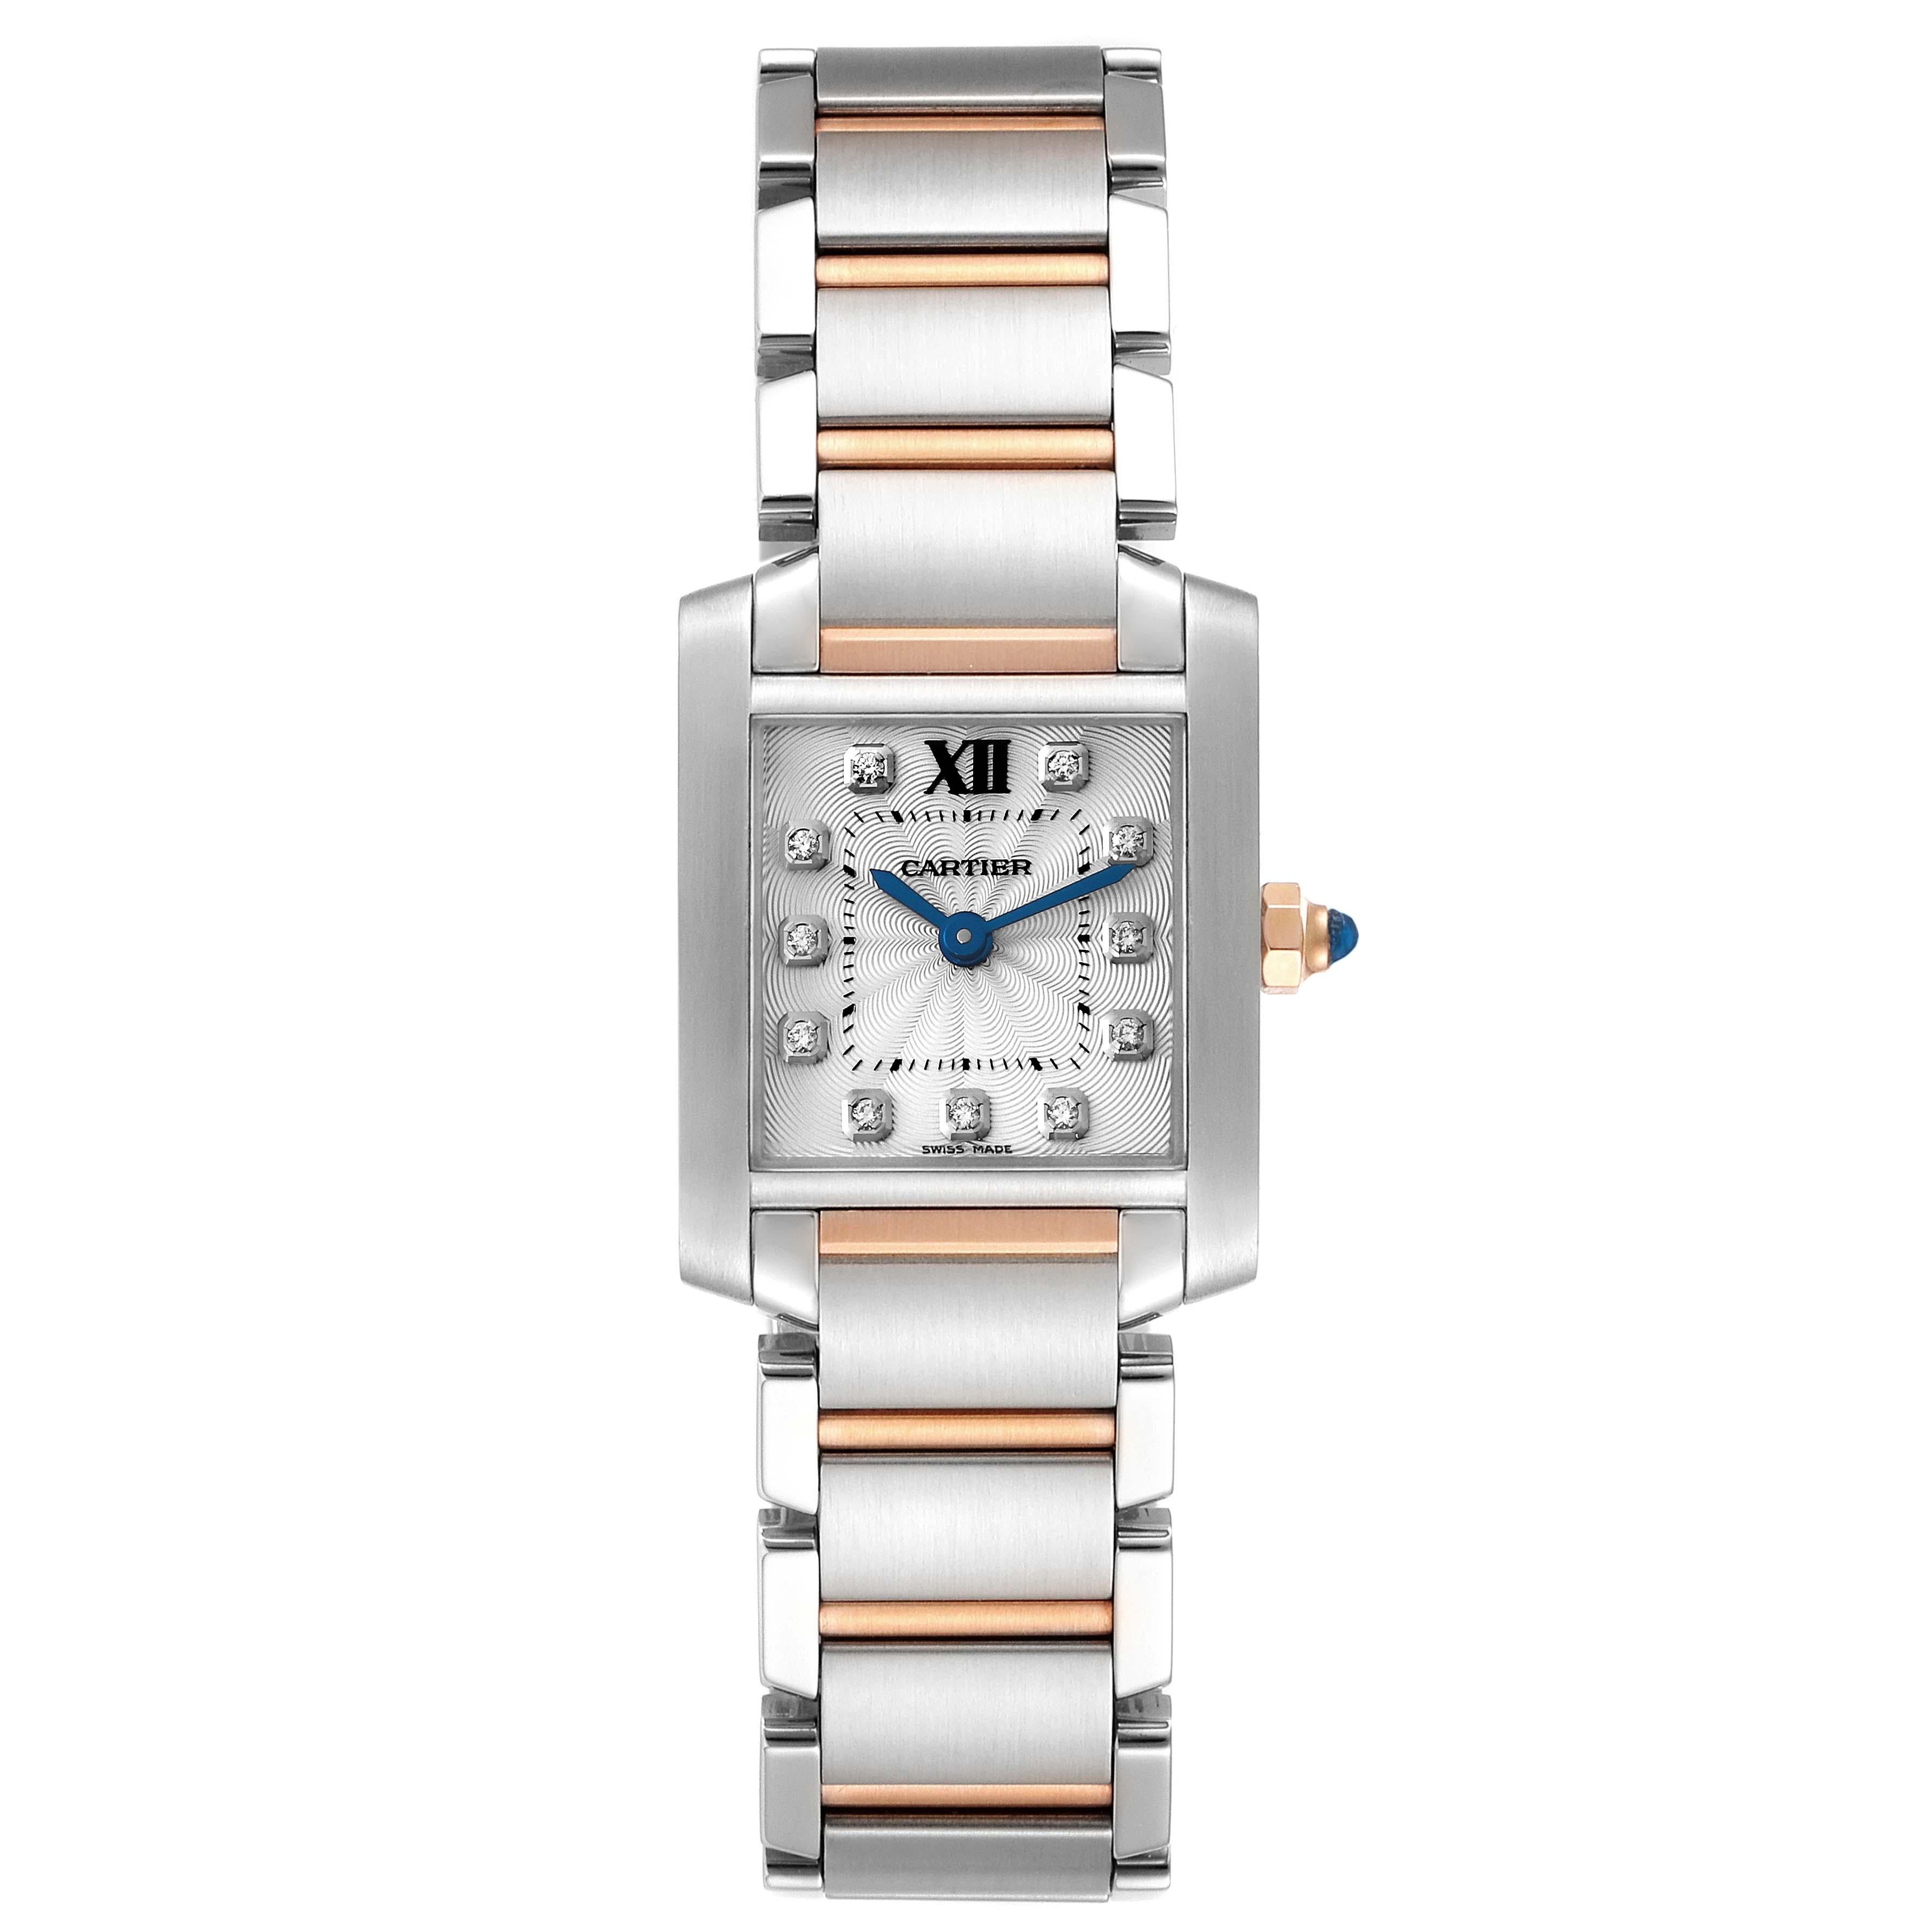 Cartier Tank Francaise Steel Rose Gold Diamond Dial Ladies Watch WE110004. Quartz movement. Stainless steel and rose gold rectangular case 20 mm x 25 mm. Octagonal 18k rose gold crown set with a blue spinel cabochon. . Scratch resistant sapphire